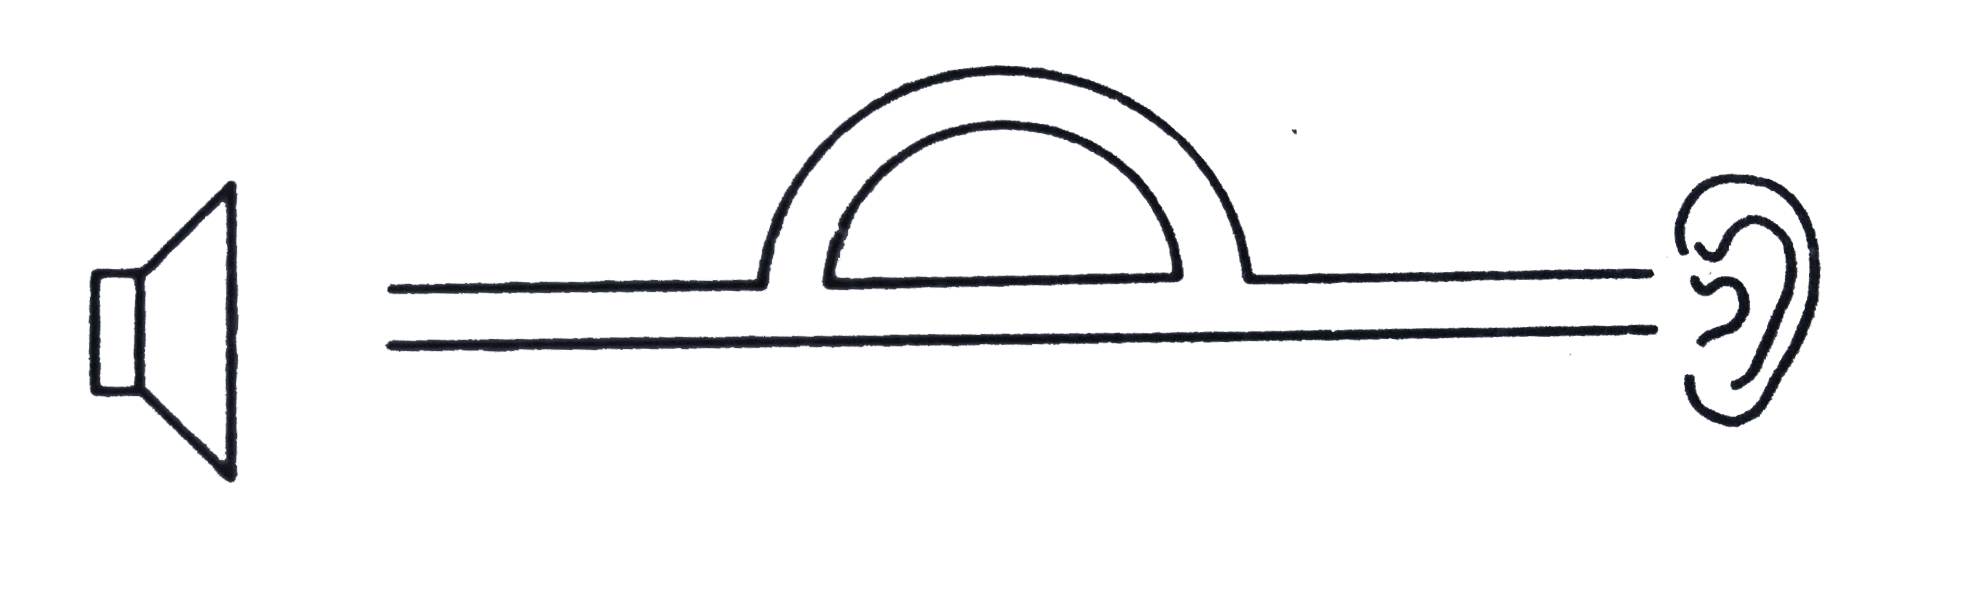 Figure shows a tube structure in which a sound signal is sent from one end and is received at the other end. The semicircular part has a radius of 20.0 cm. The frequency of the sound source can be varied electronically between  1000 and 4000 Hz. Find the frequencies at which maxima of intensity are detected. The speed of sound in air =340ms^-1.